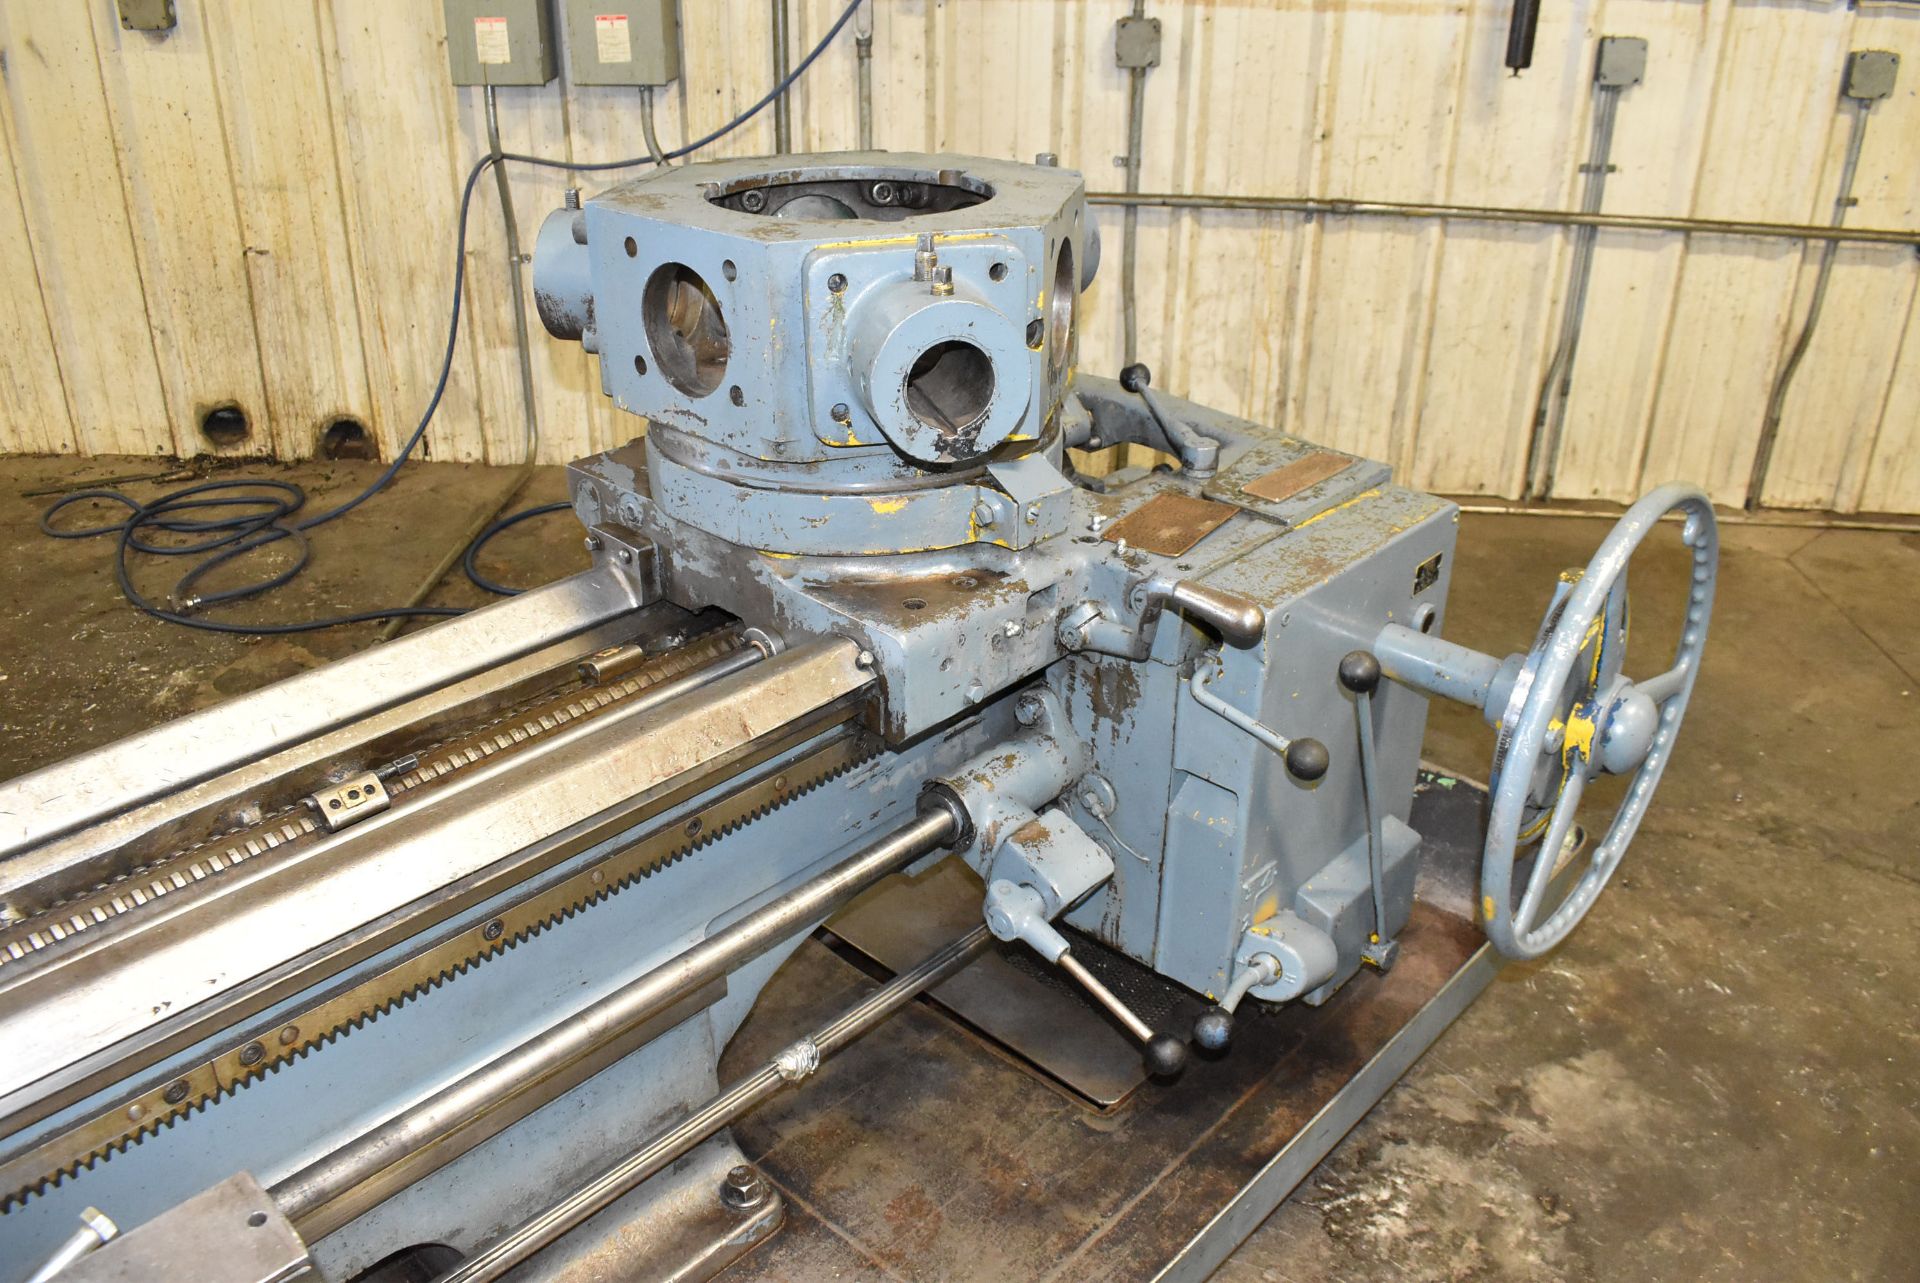 WARNER & SWASEY 3A TURRET LATHE WITH 24" SWING OVER BED, 52" DISTANCE BETWEEN CENTERS, 6.25" SPINDLE - Image 6 of 9